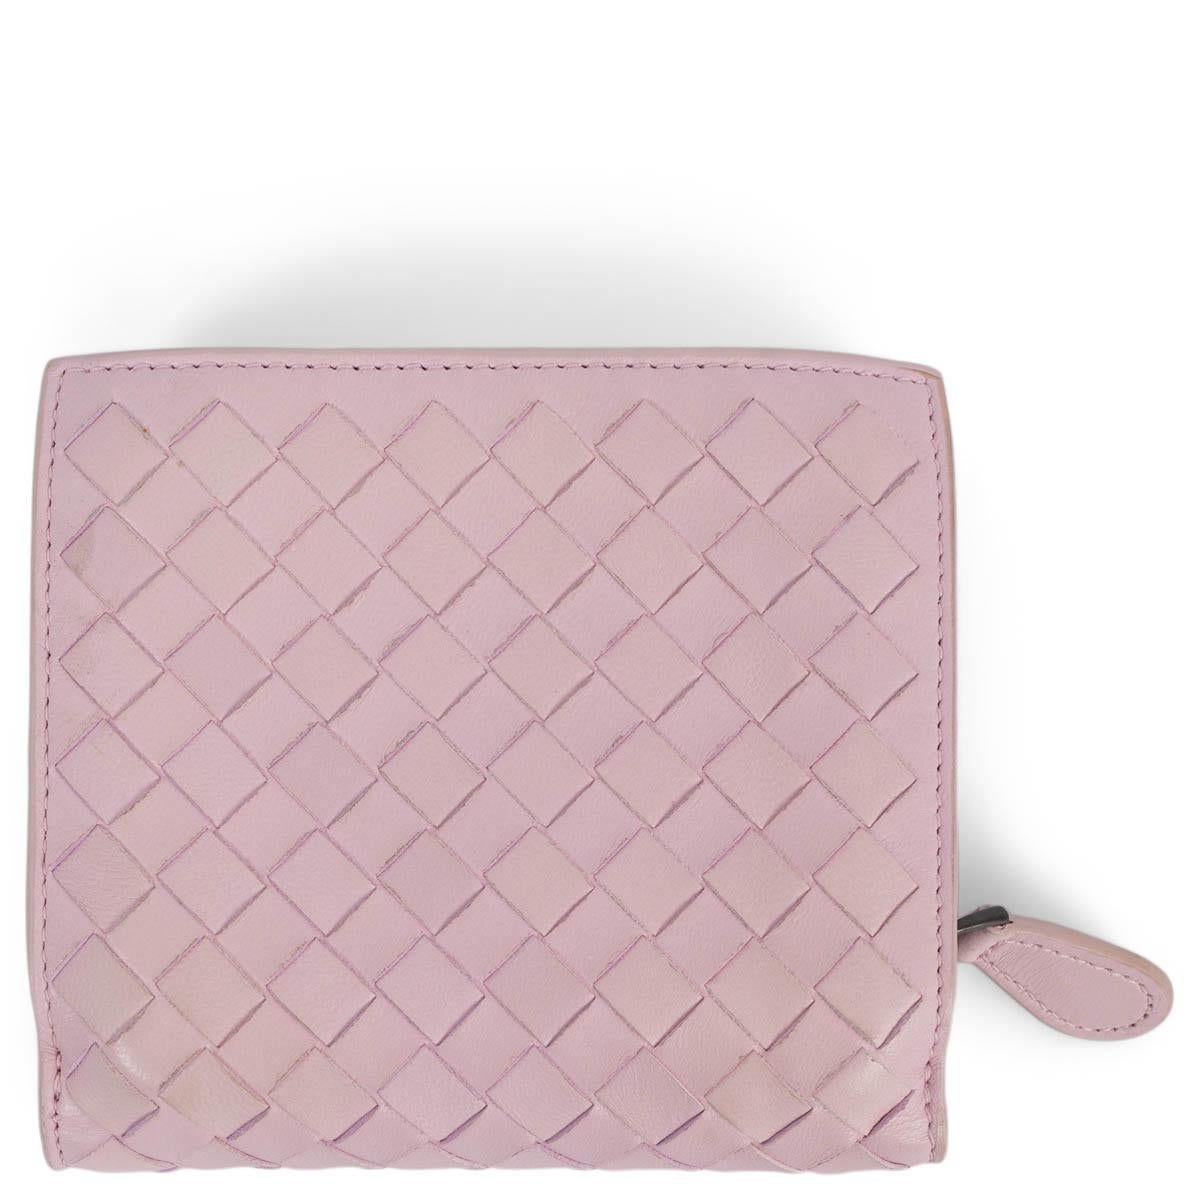 100% authentic Bottega Veneta Intrecciato Compact wallet in light pink Nappa leather. The interior features one zipped coin pocket, two open compartments and eight credit card slots. Has been carried and is in excellent condition. Come with dust bag